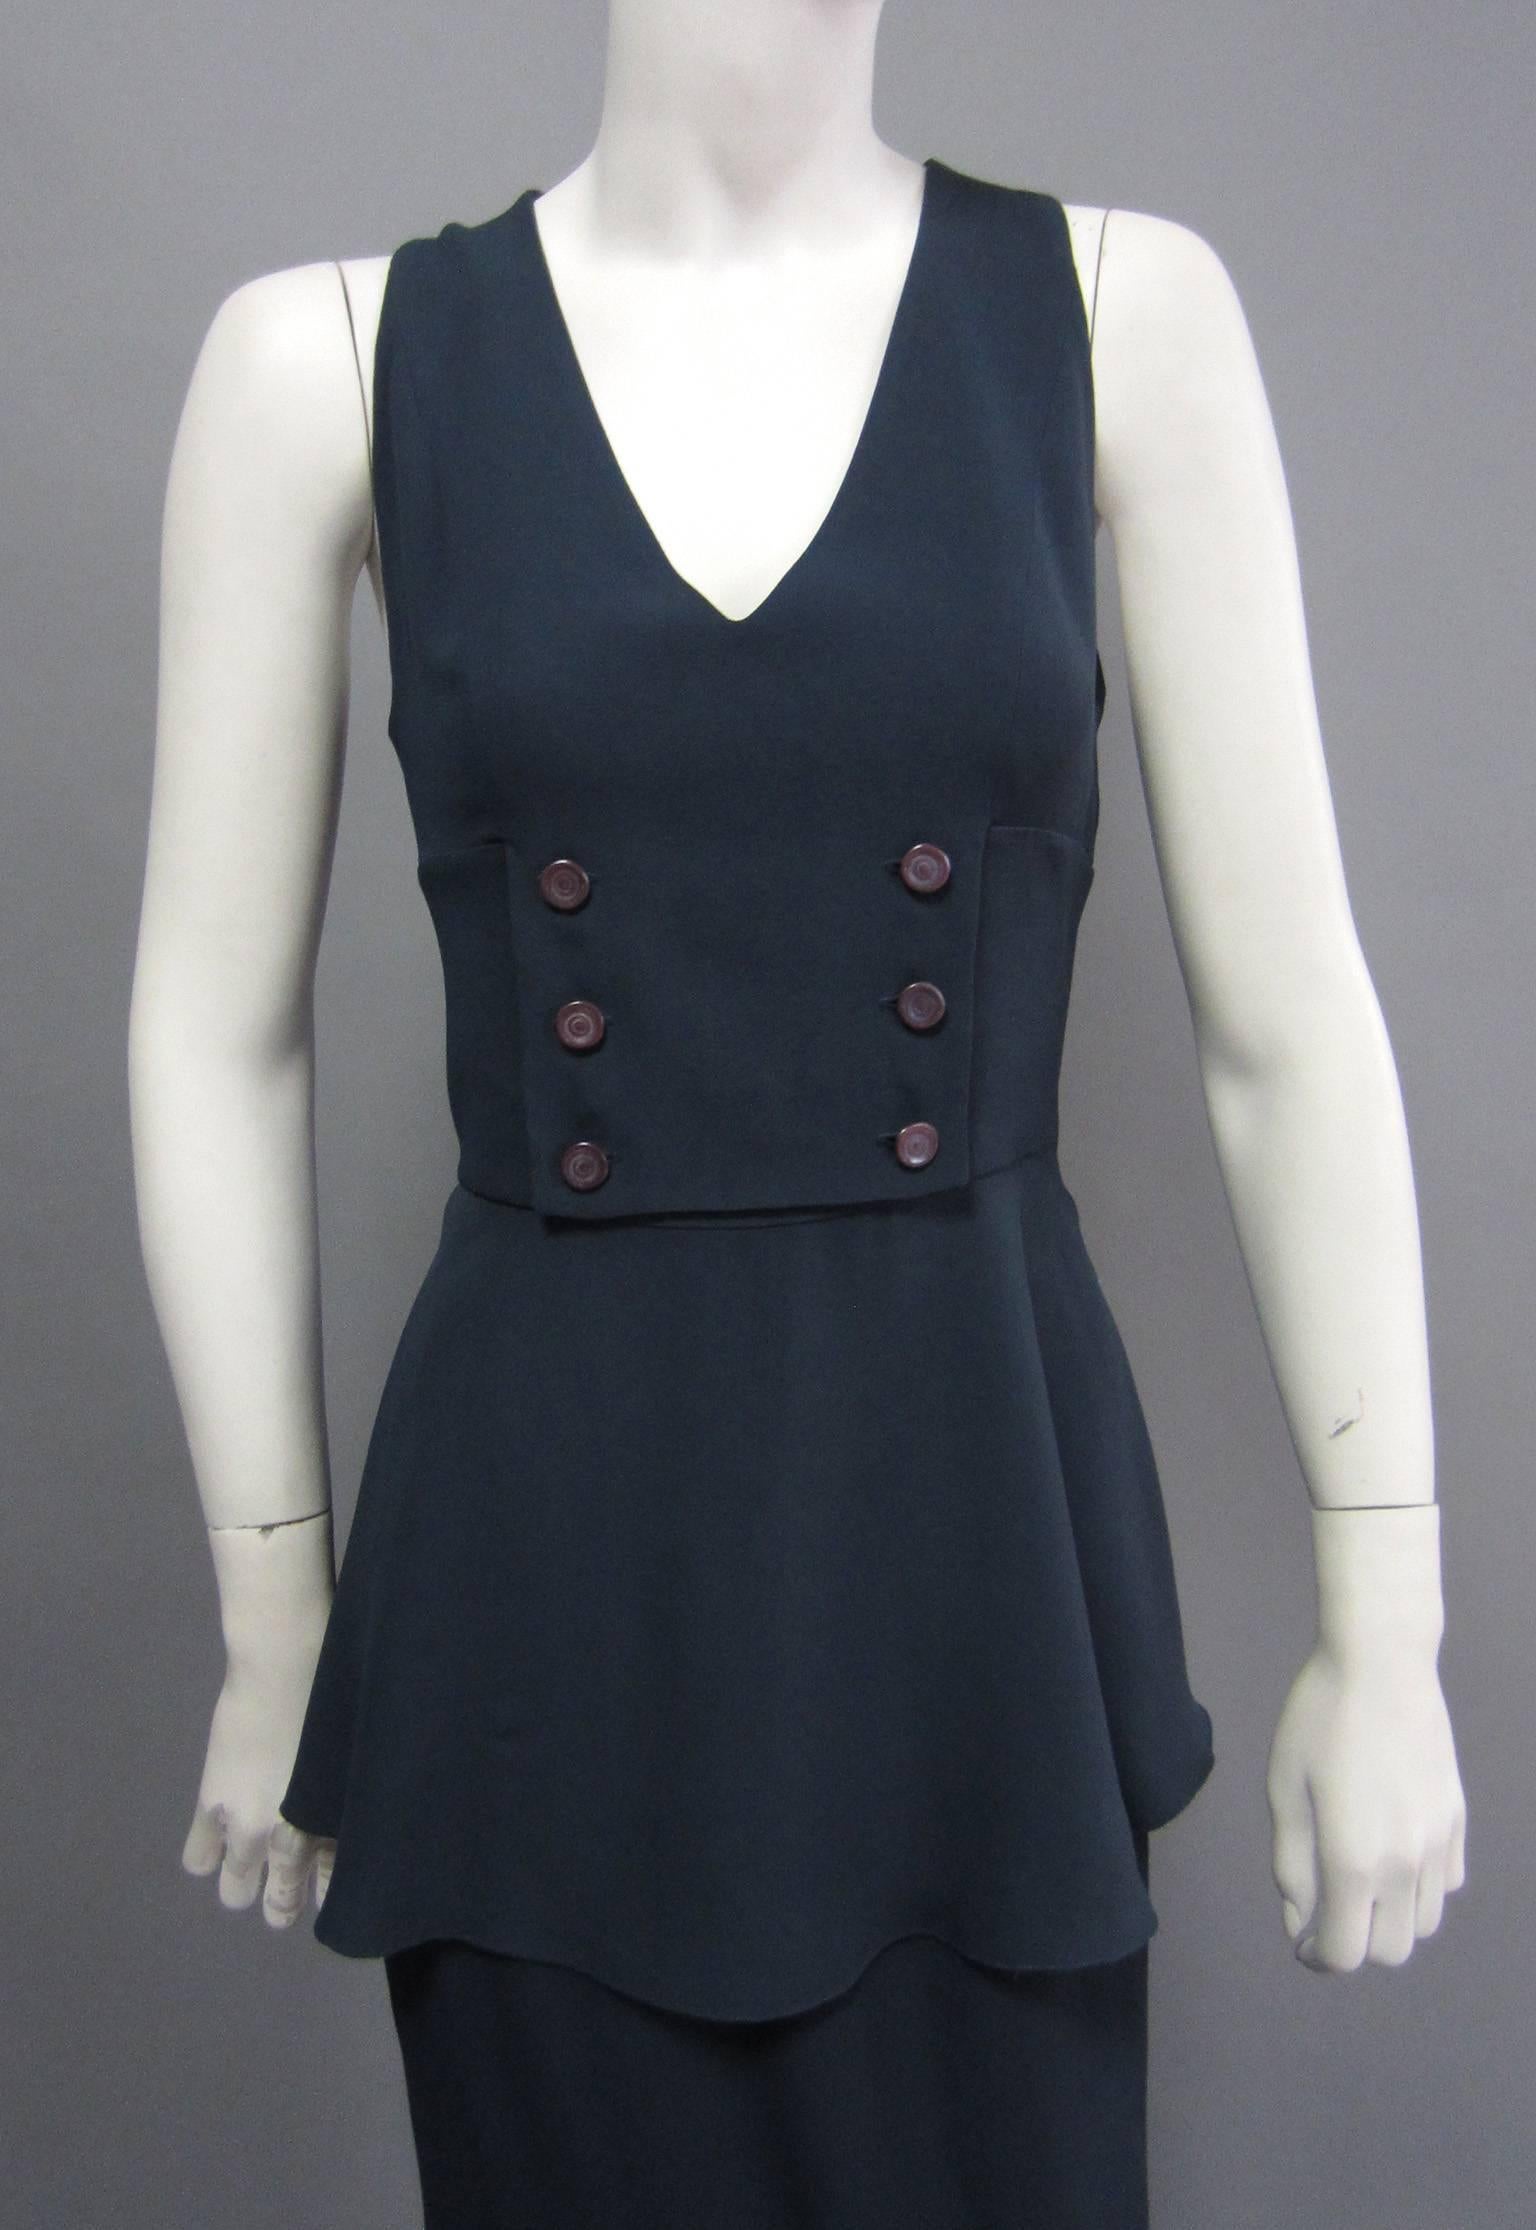 CHLOE 3 piece Ensemble with Jacket, Top & Skirt with Button Detail For Sale 2